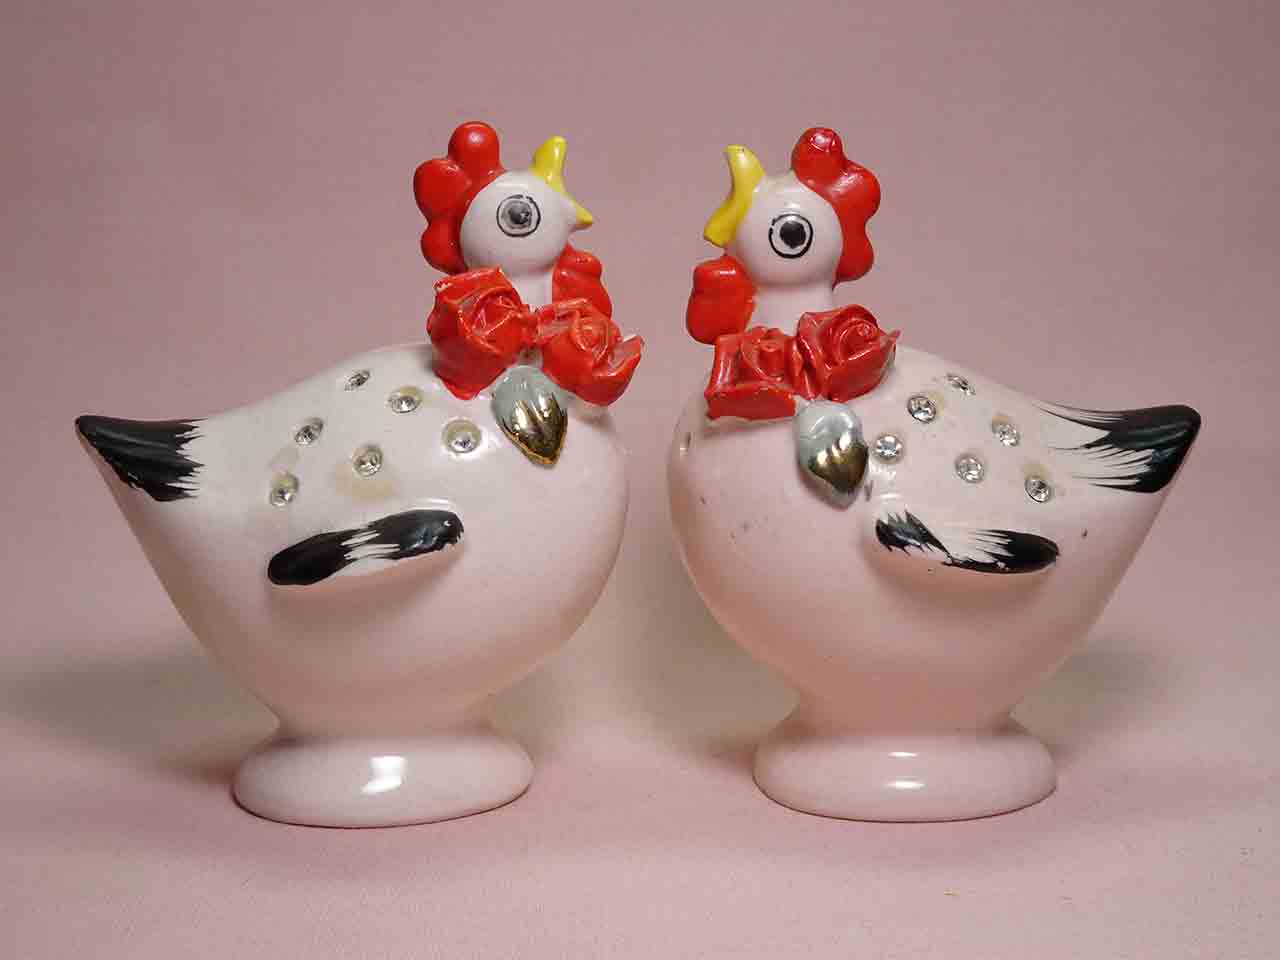 Napco Pink Farm Animals with Rhinestones and Delicate Red Flowers - chickens / roosters